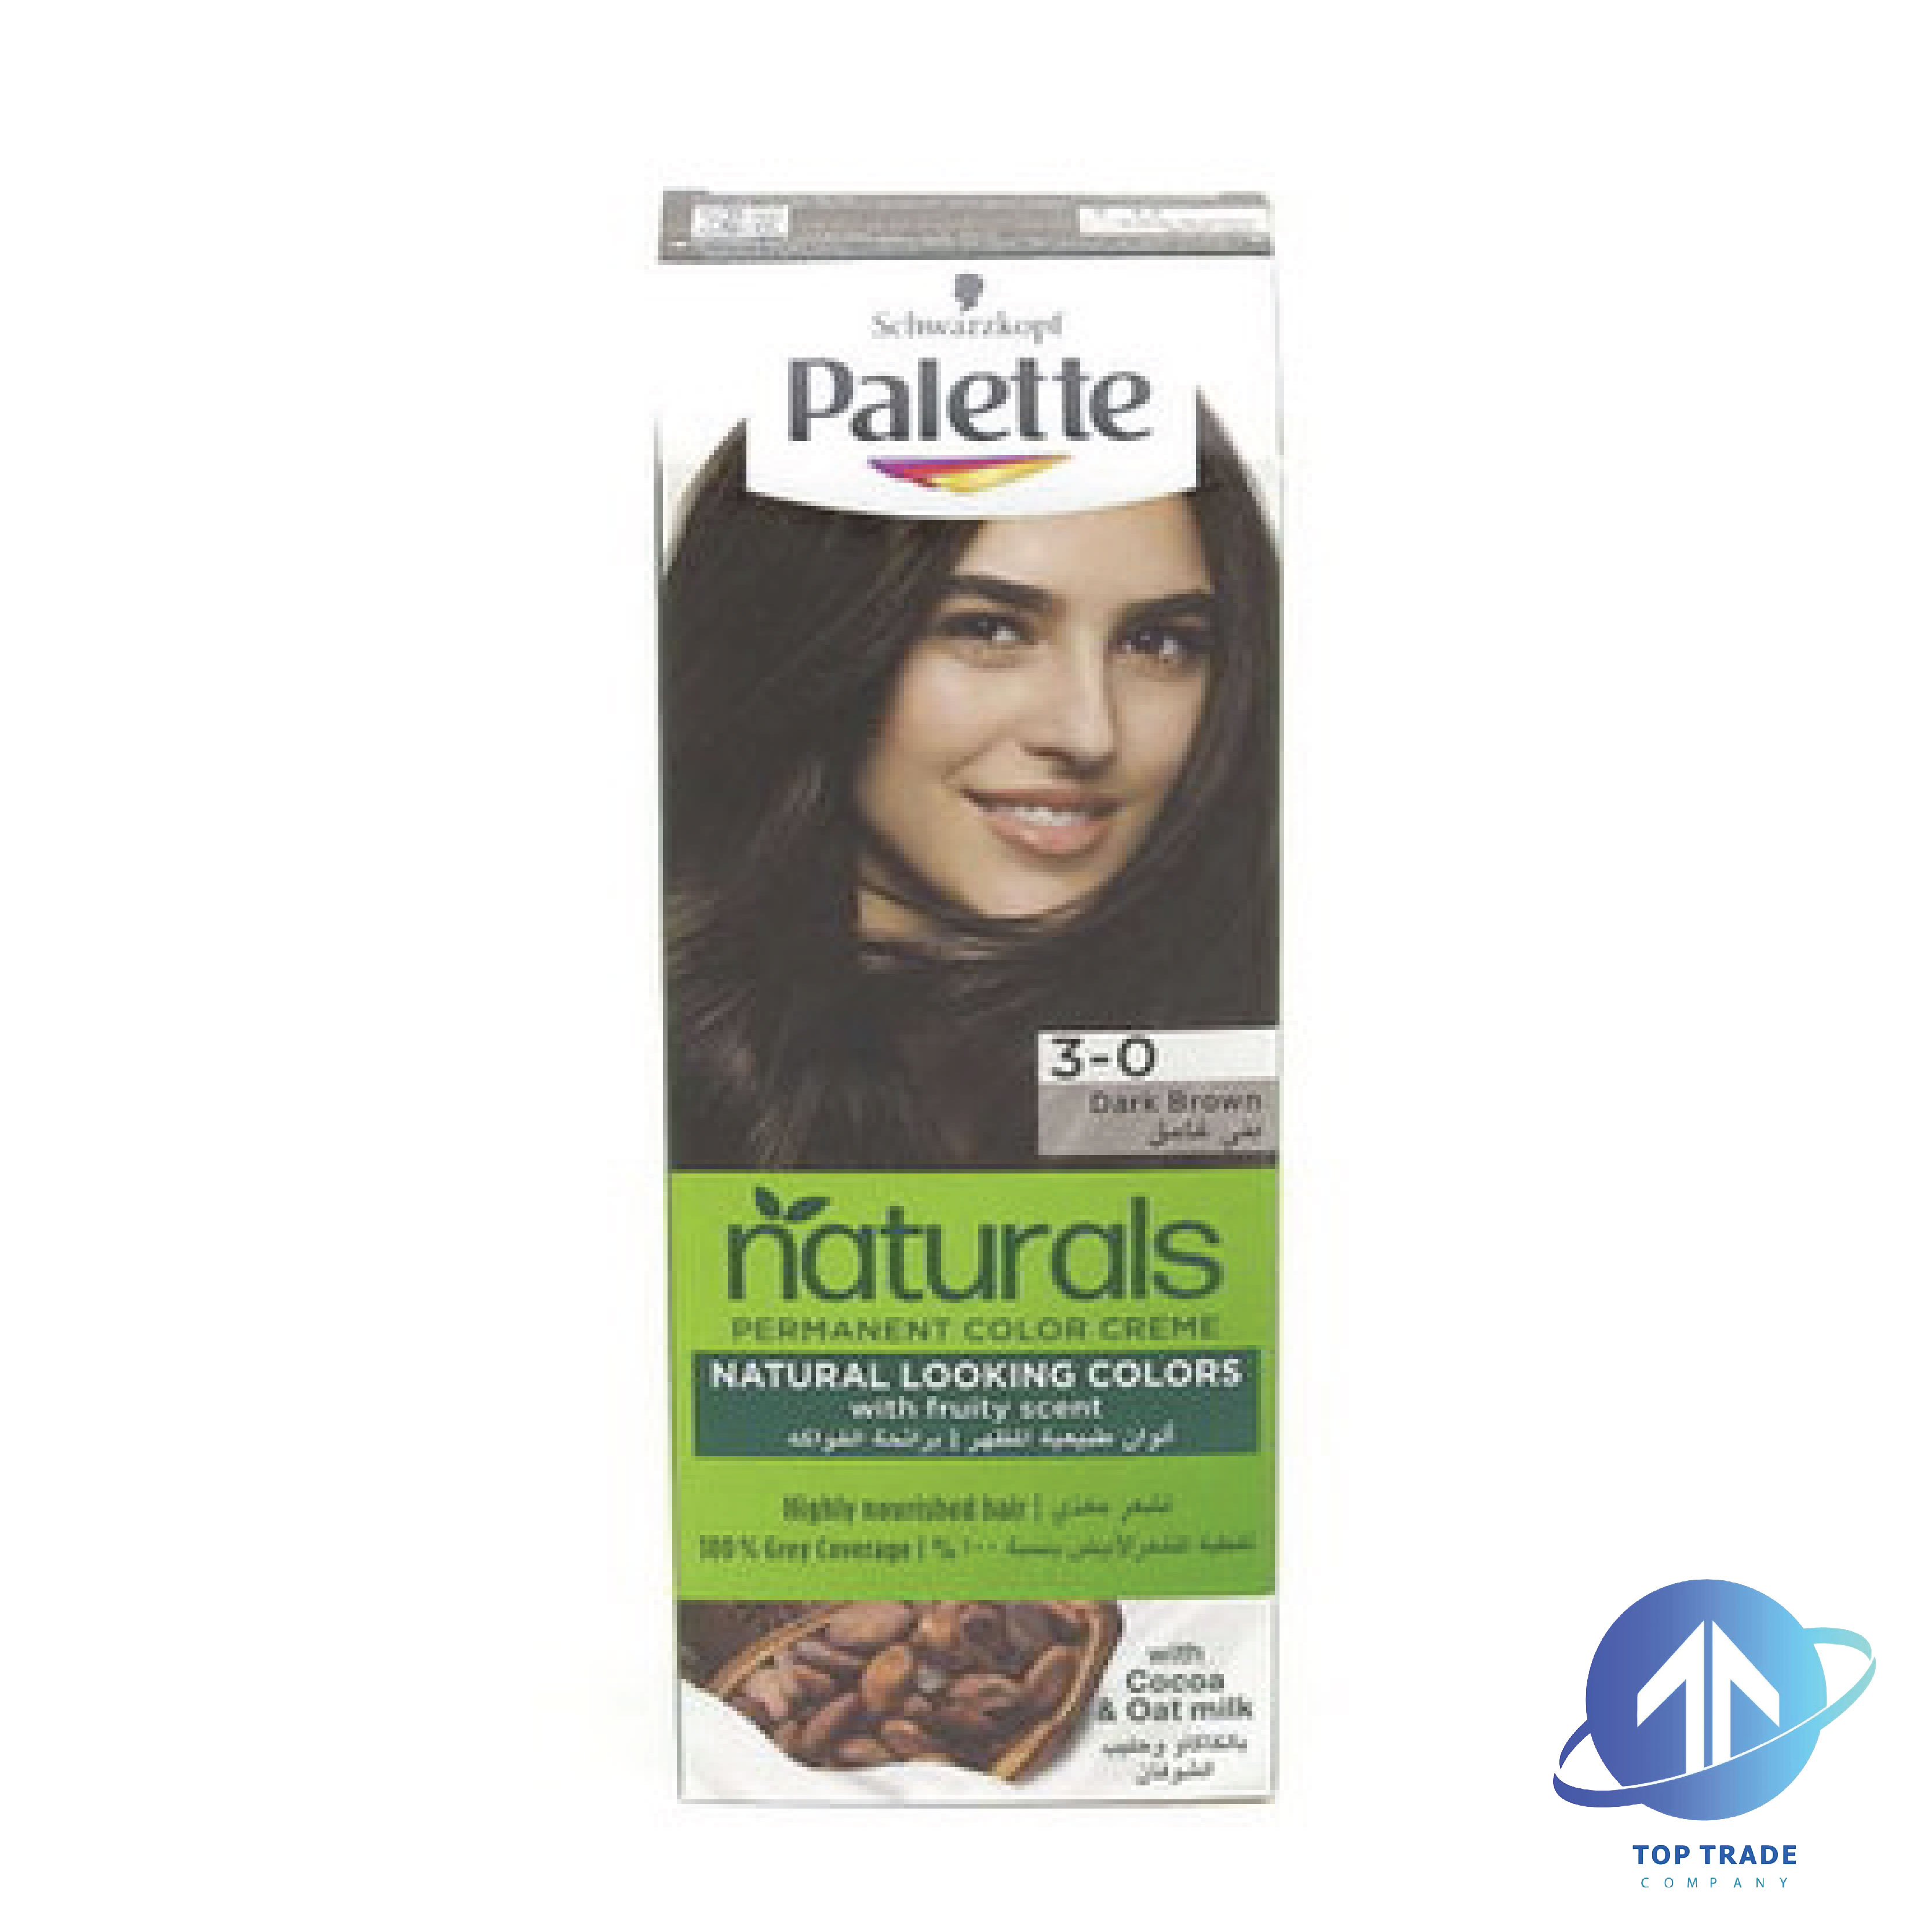 Palette hair coloring with argon oil hair color 3-0 dark brown